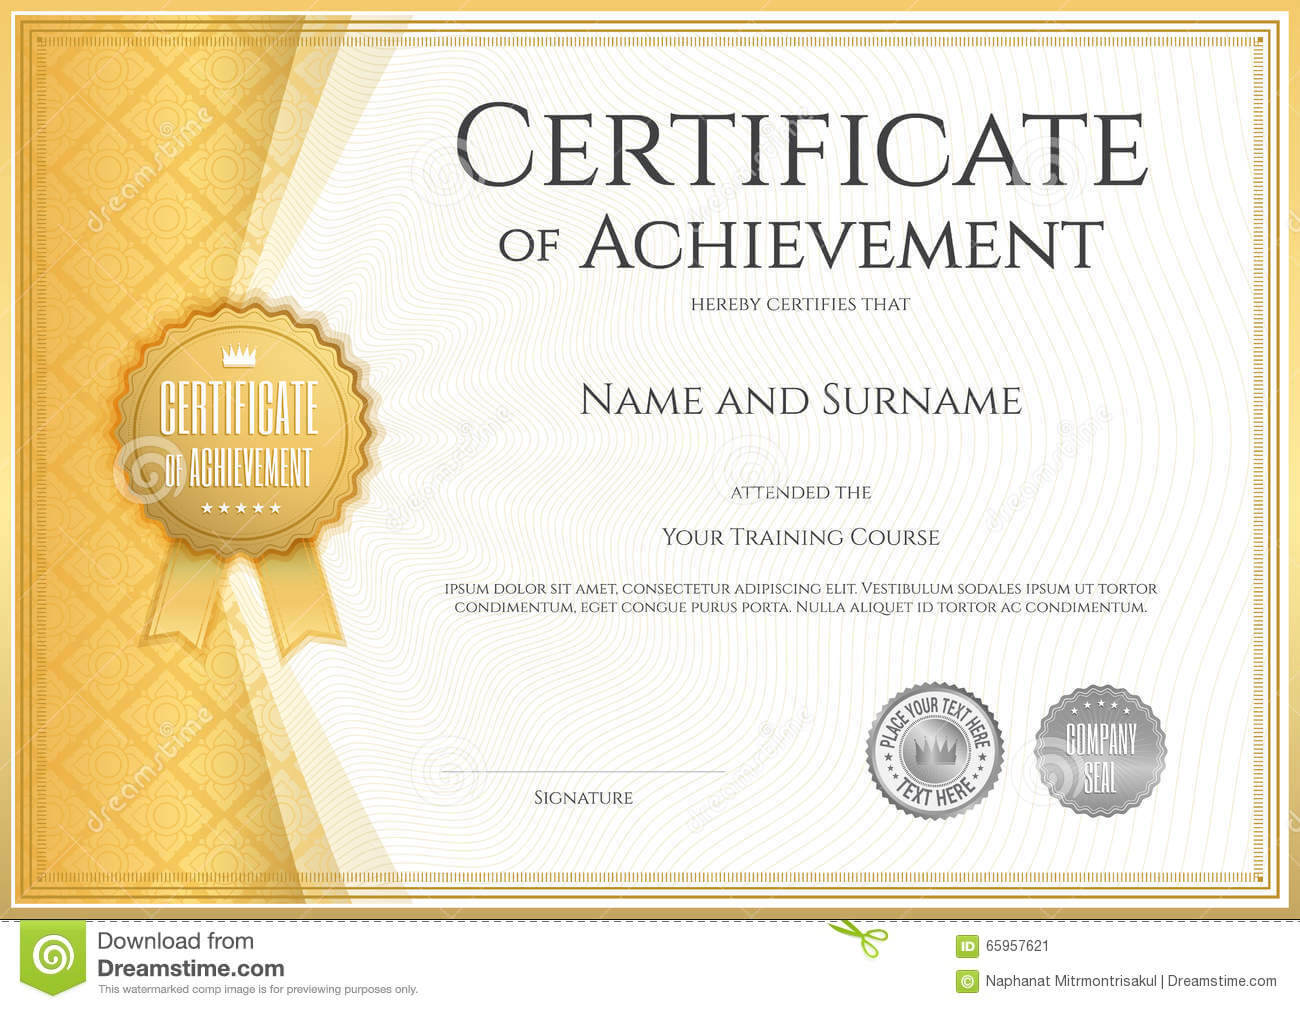 Certificate Of Achievement Template In Vector Stock Vector With Blank Certificate Of Achievement Template